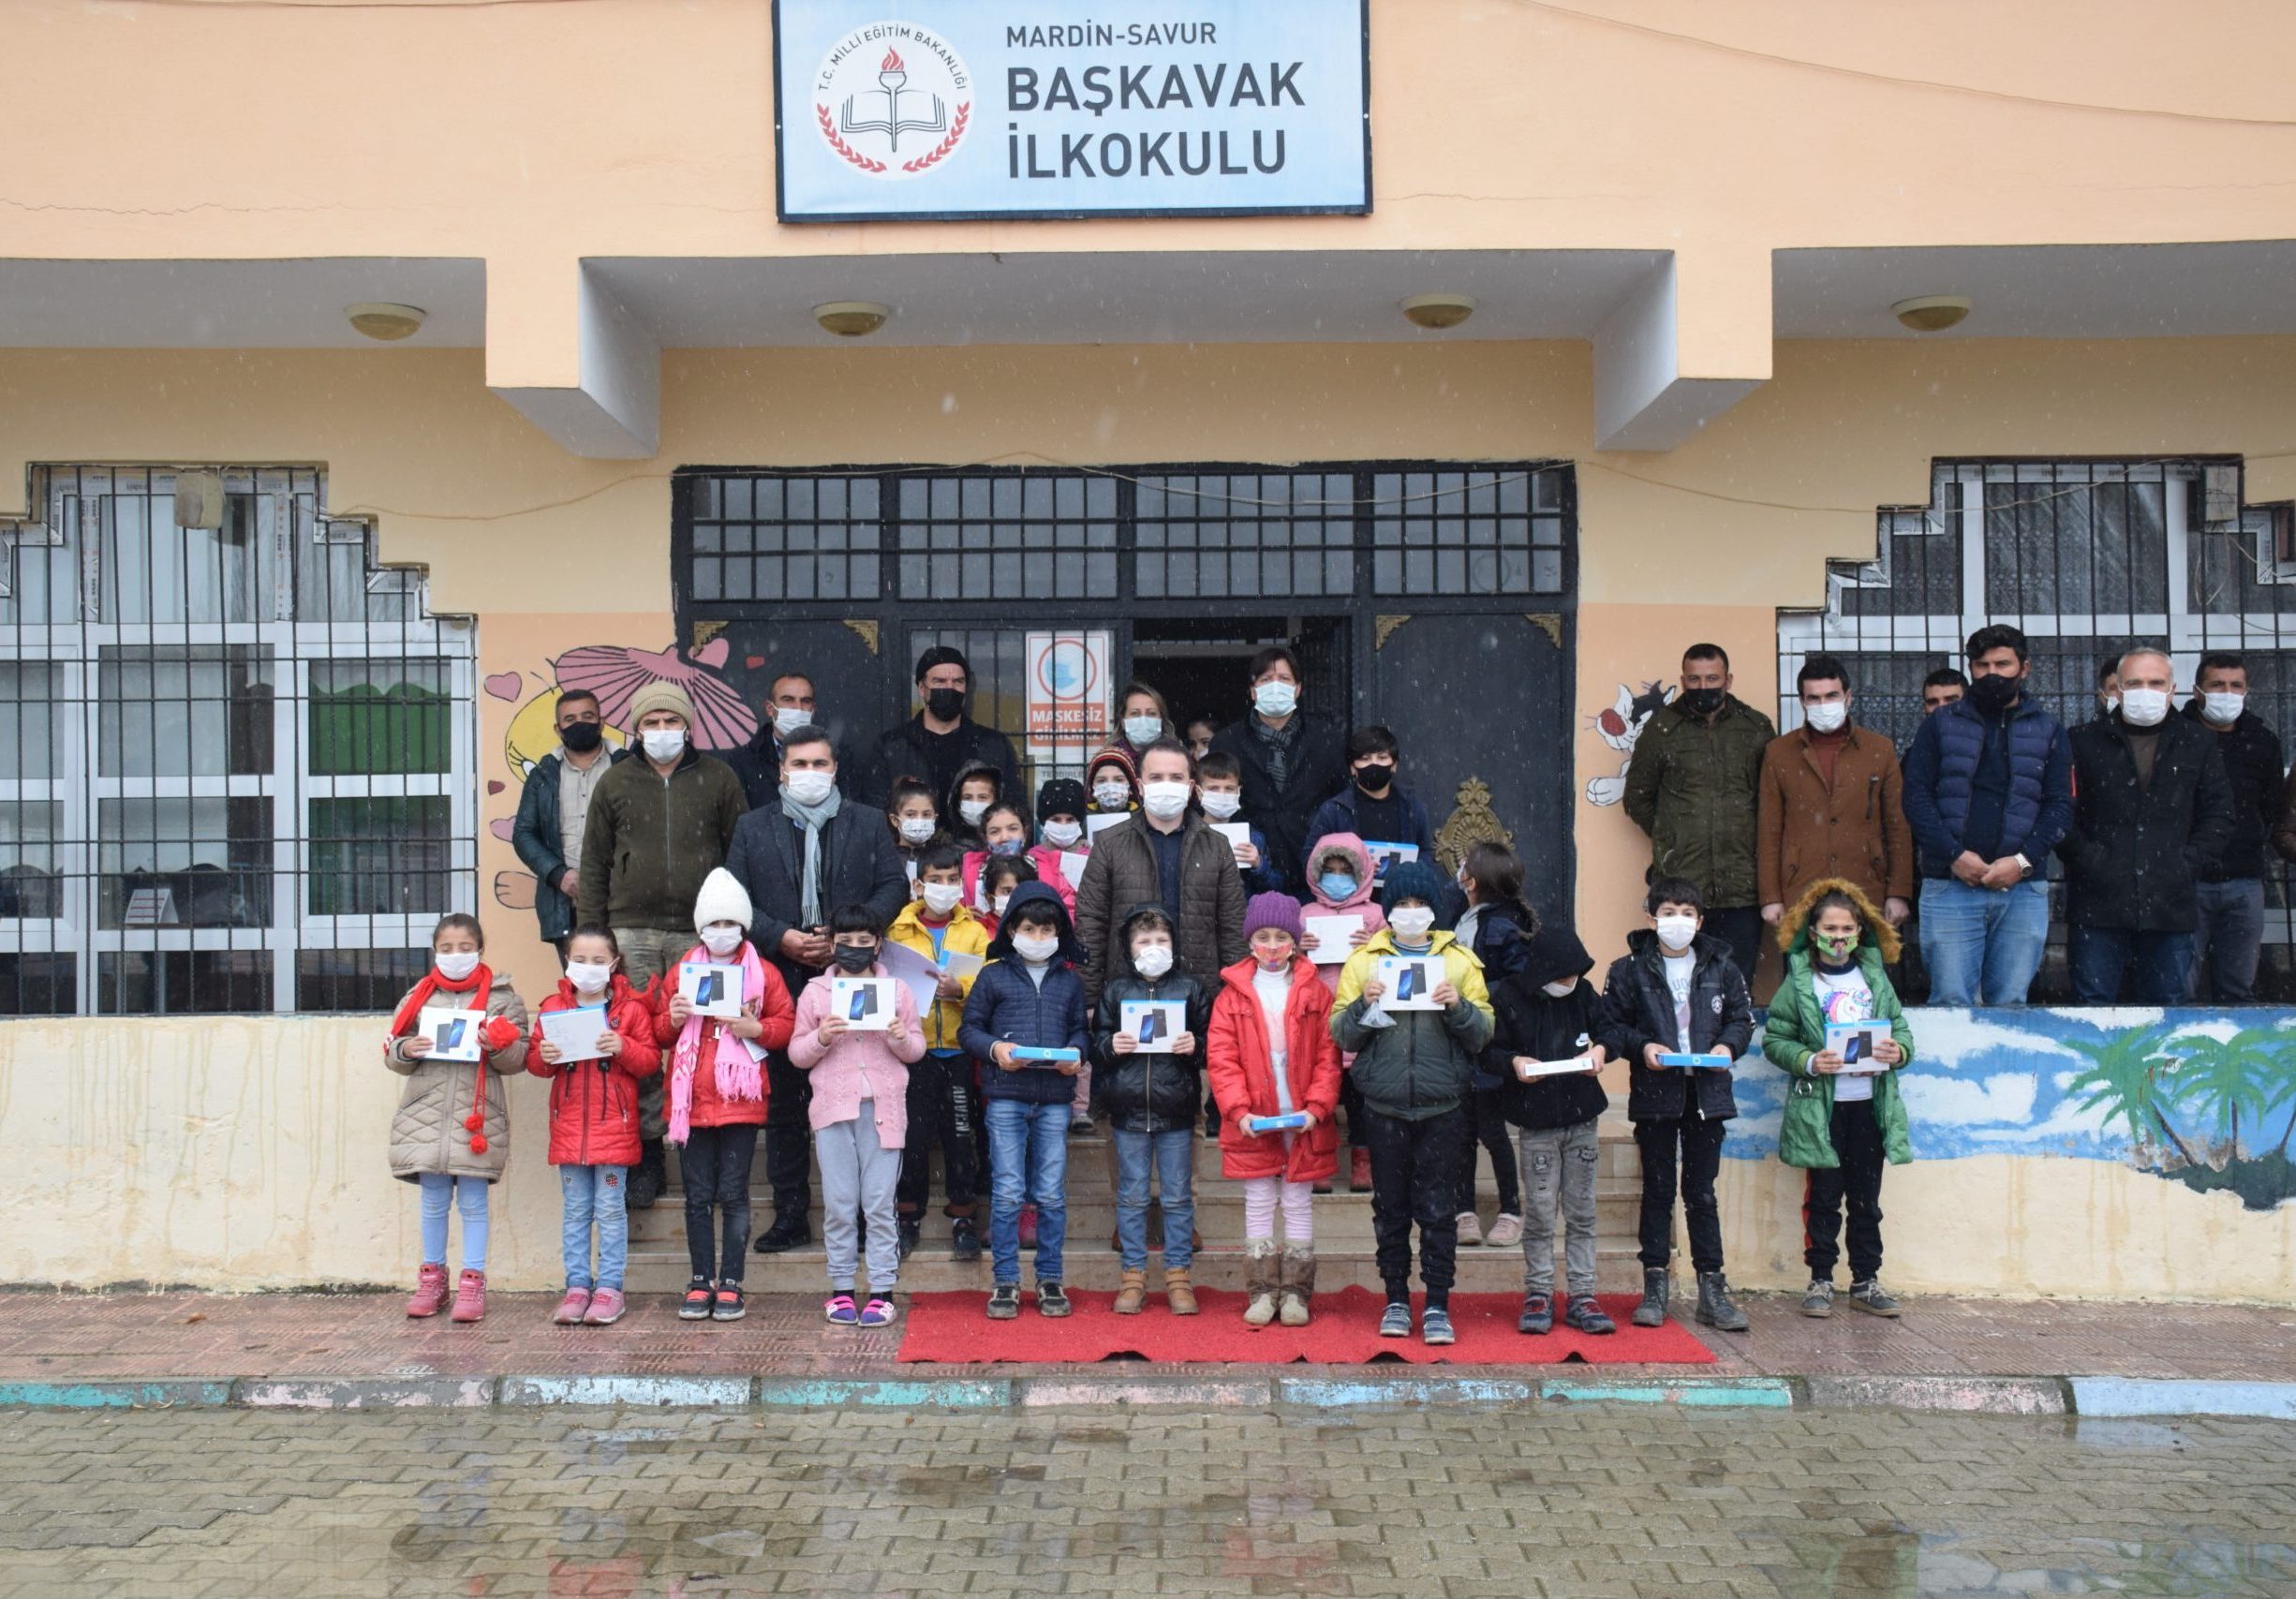 The Walt Disney Company Turkey Creates Magical Moments by Supporting Local Charity TEGV with their New World Project